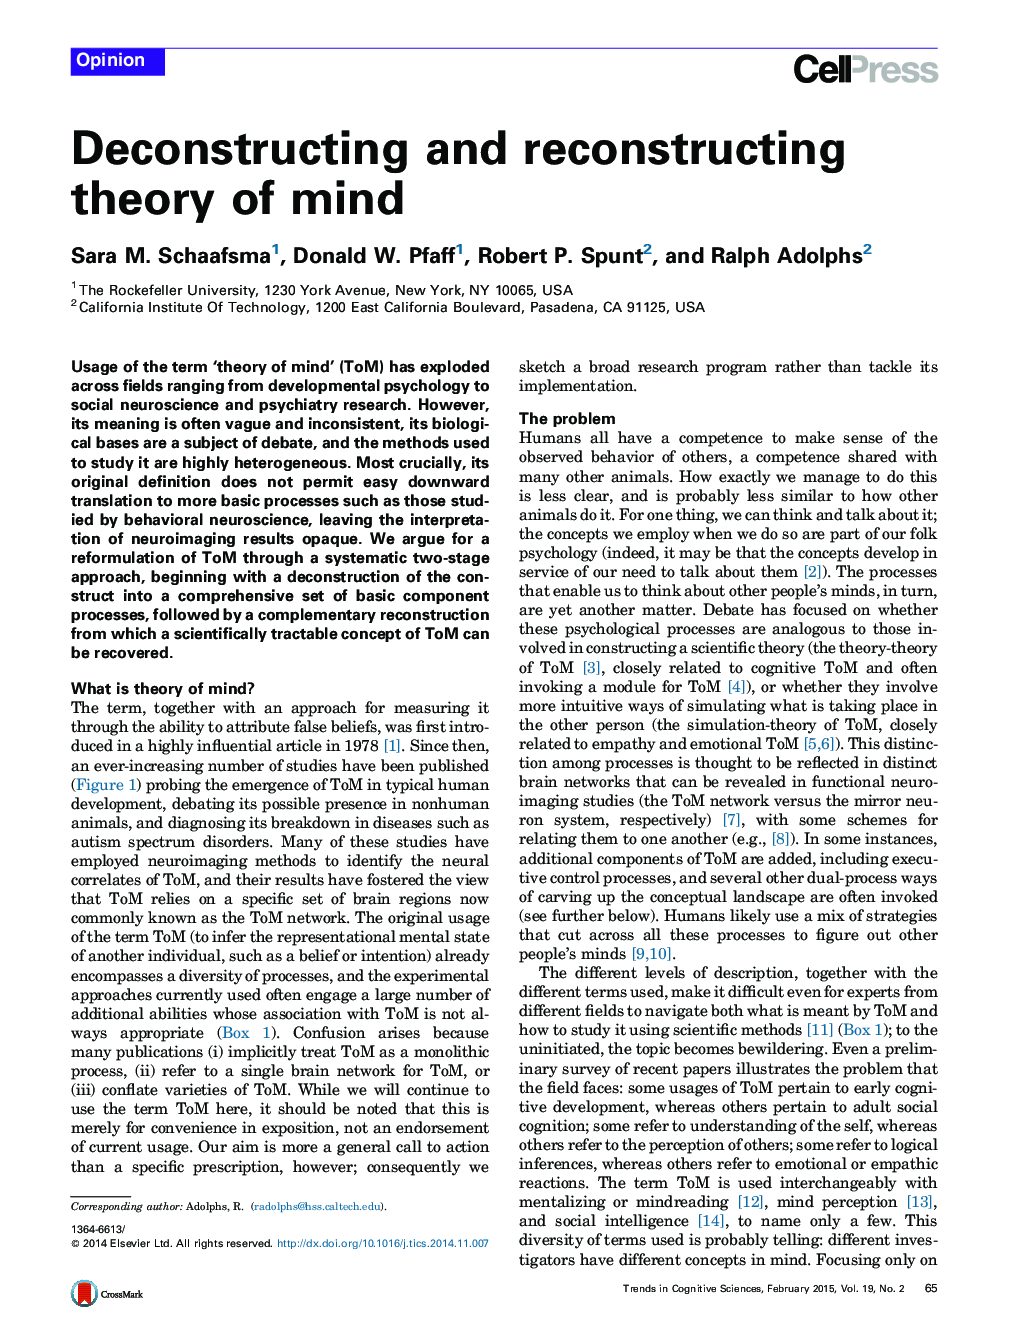 Deconstructing and reconstructing theory of mind